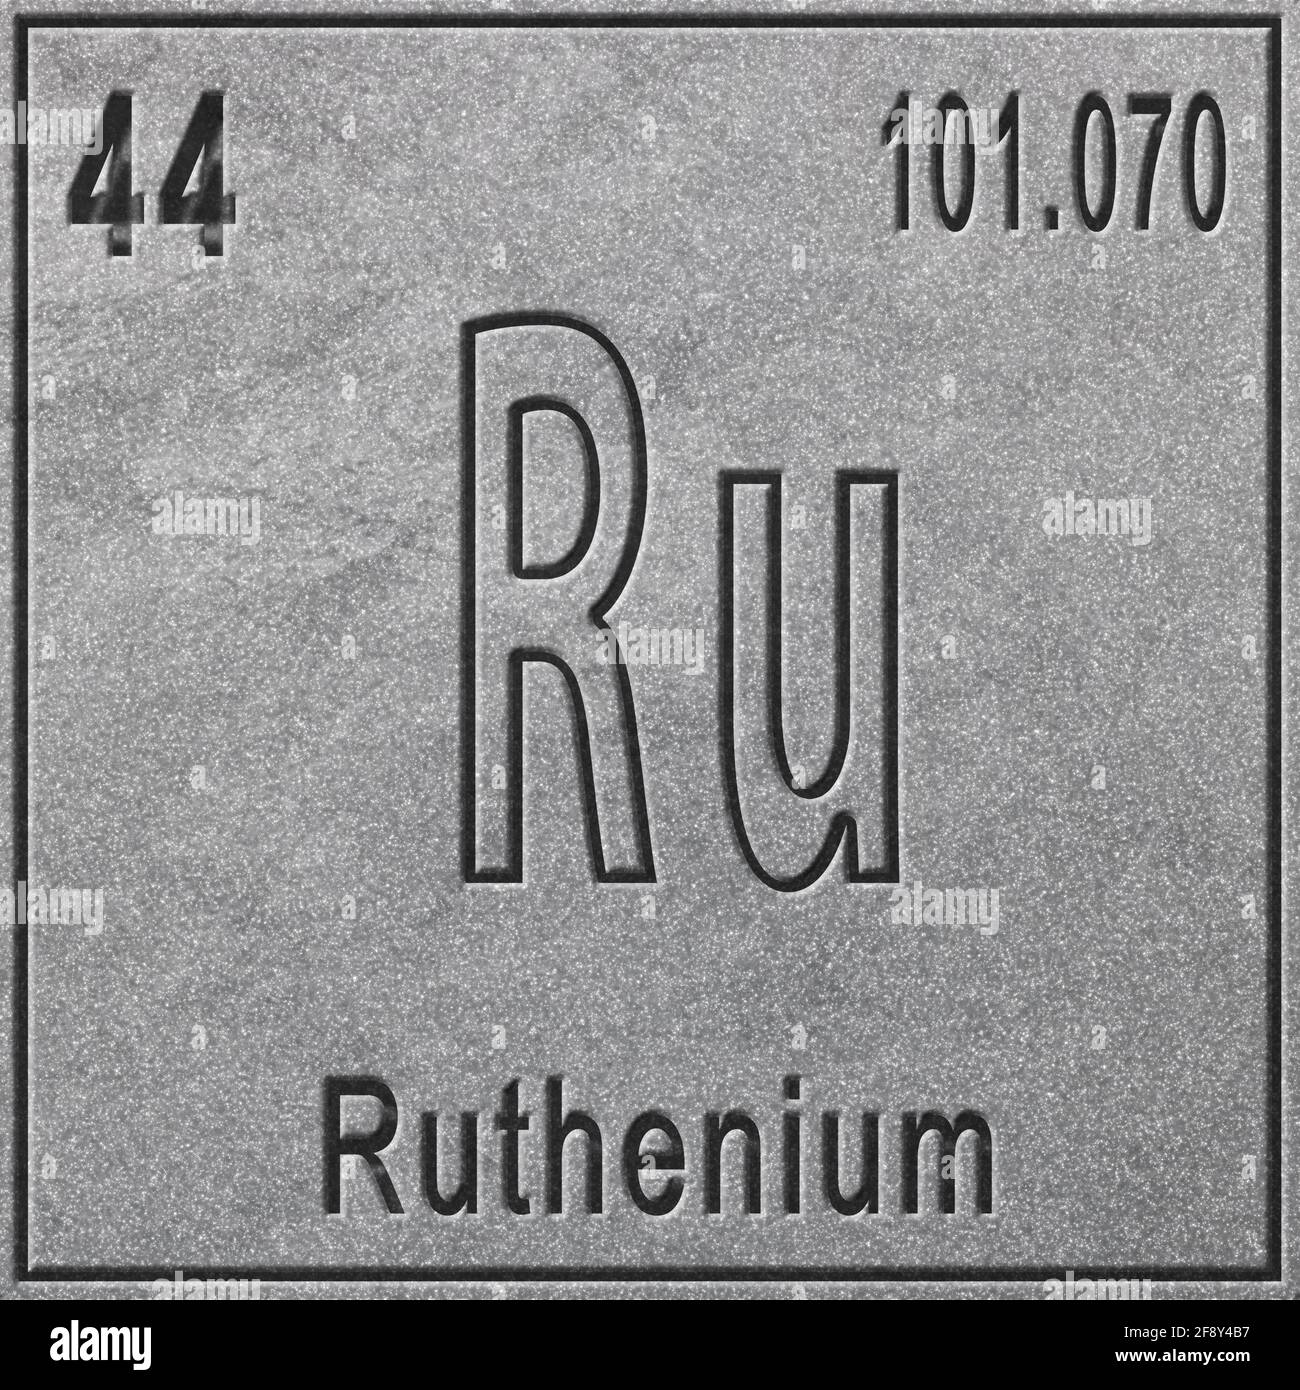 Ruthenium chemical element, Sign with atomic number and atomic weight, Periodic Table Element, silver background Stock Photo